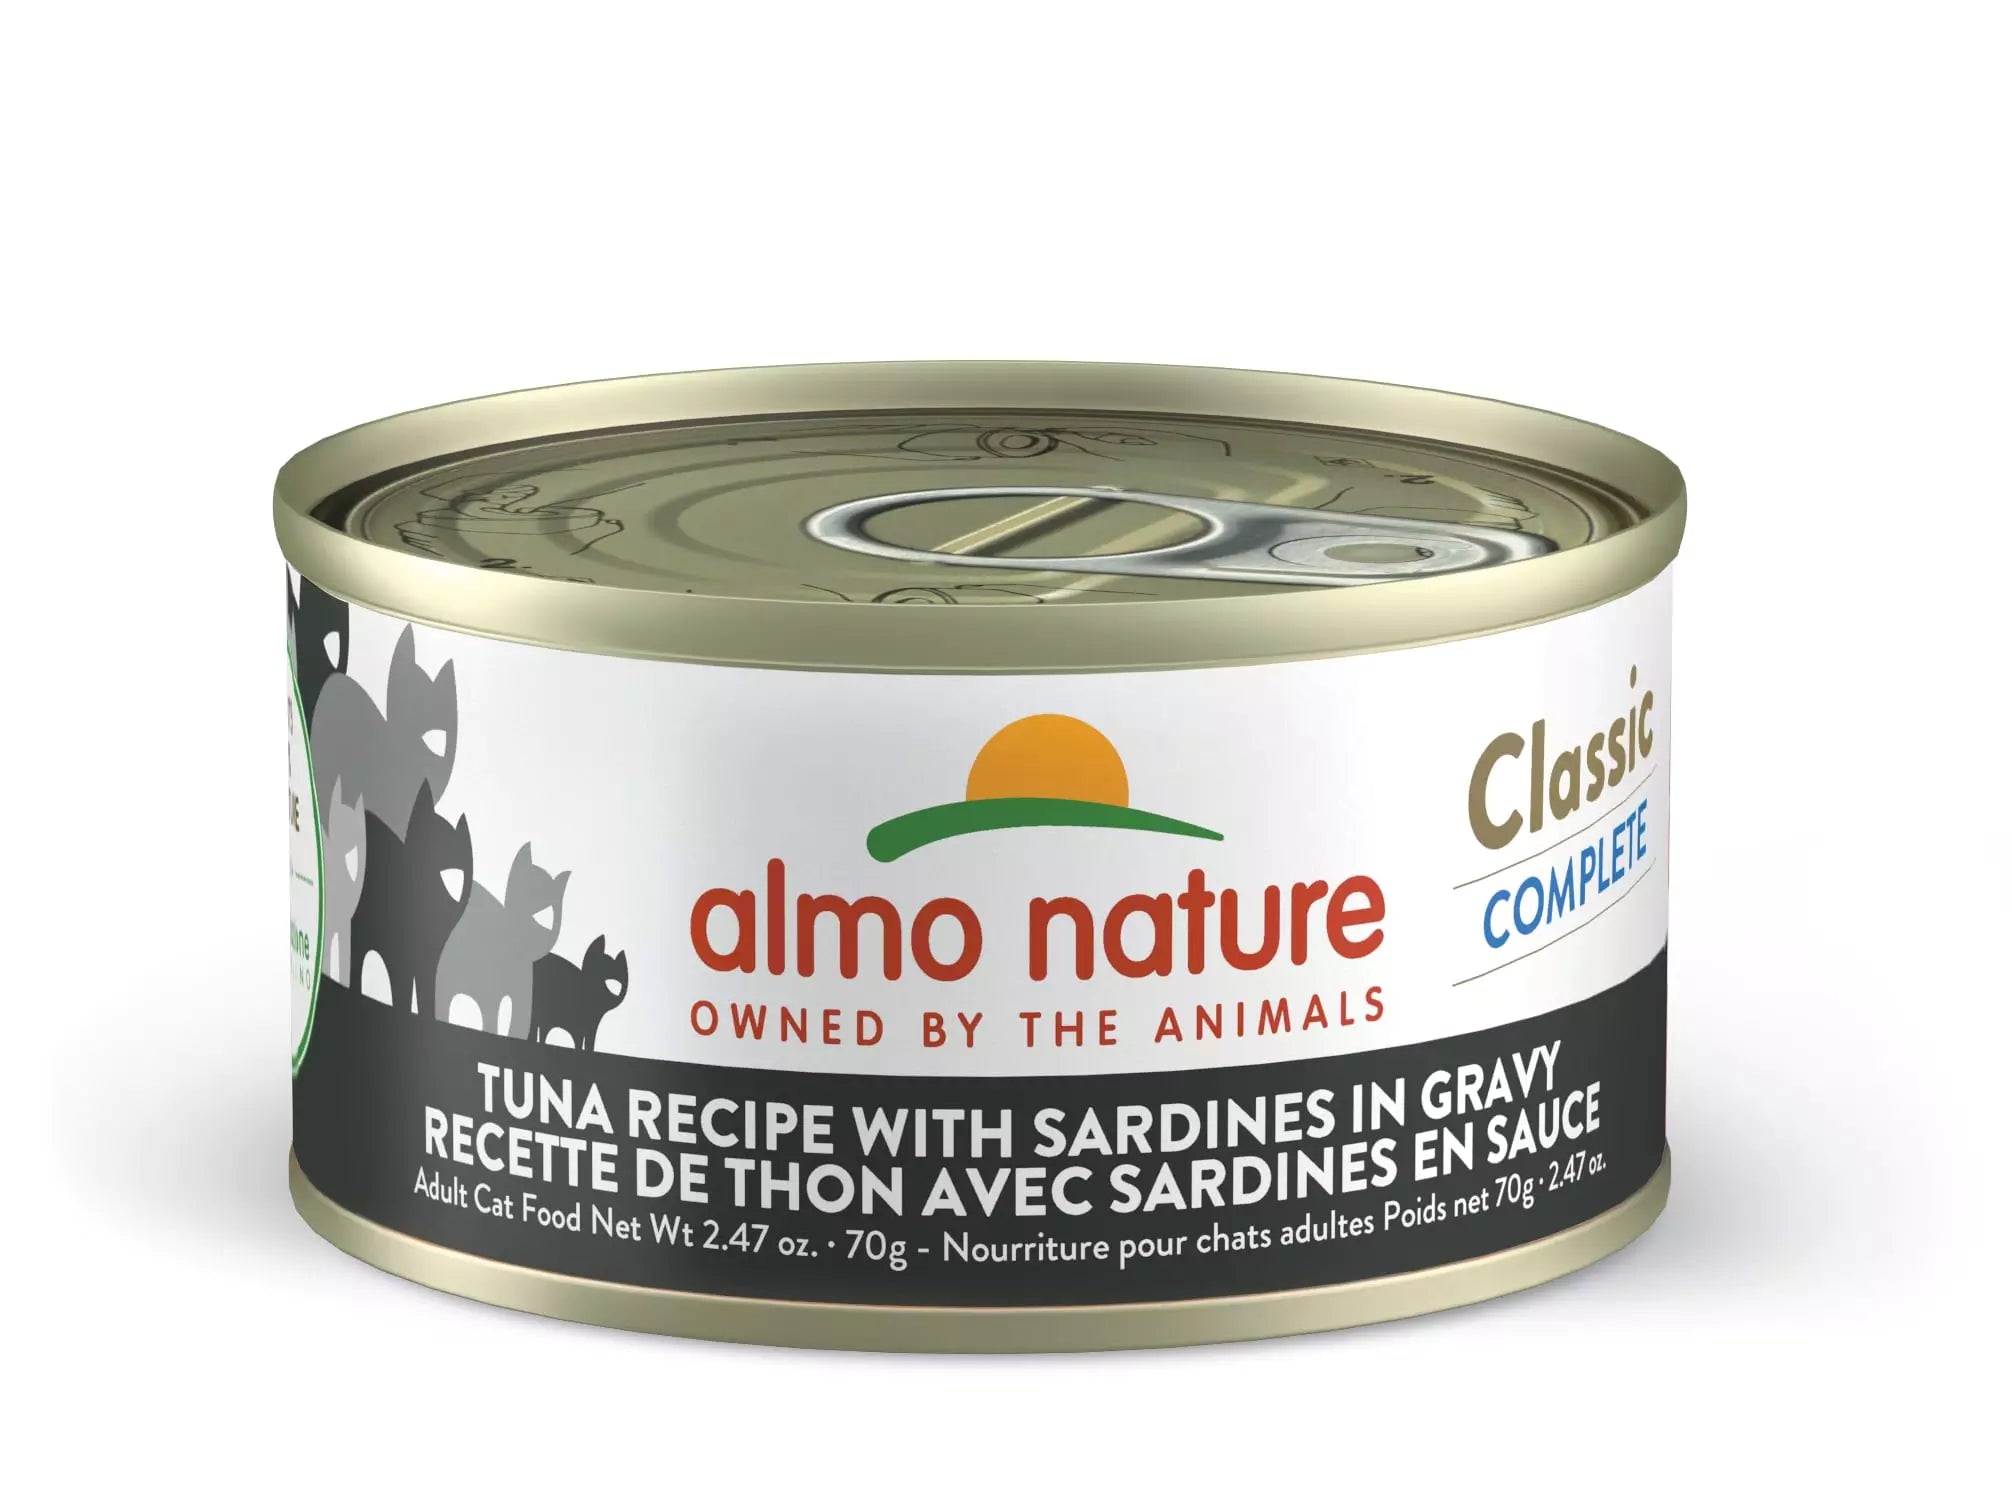 Almo Nature - Classic Complete - Tuna With Sardines in Gravy (Wet Cat Food)